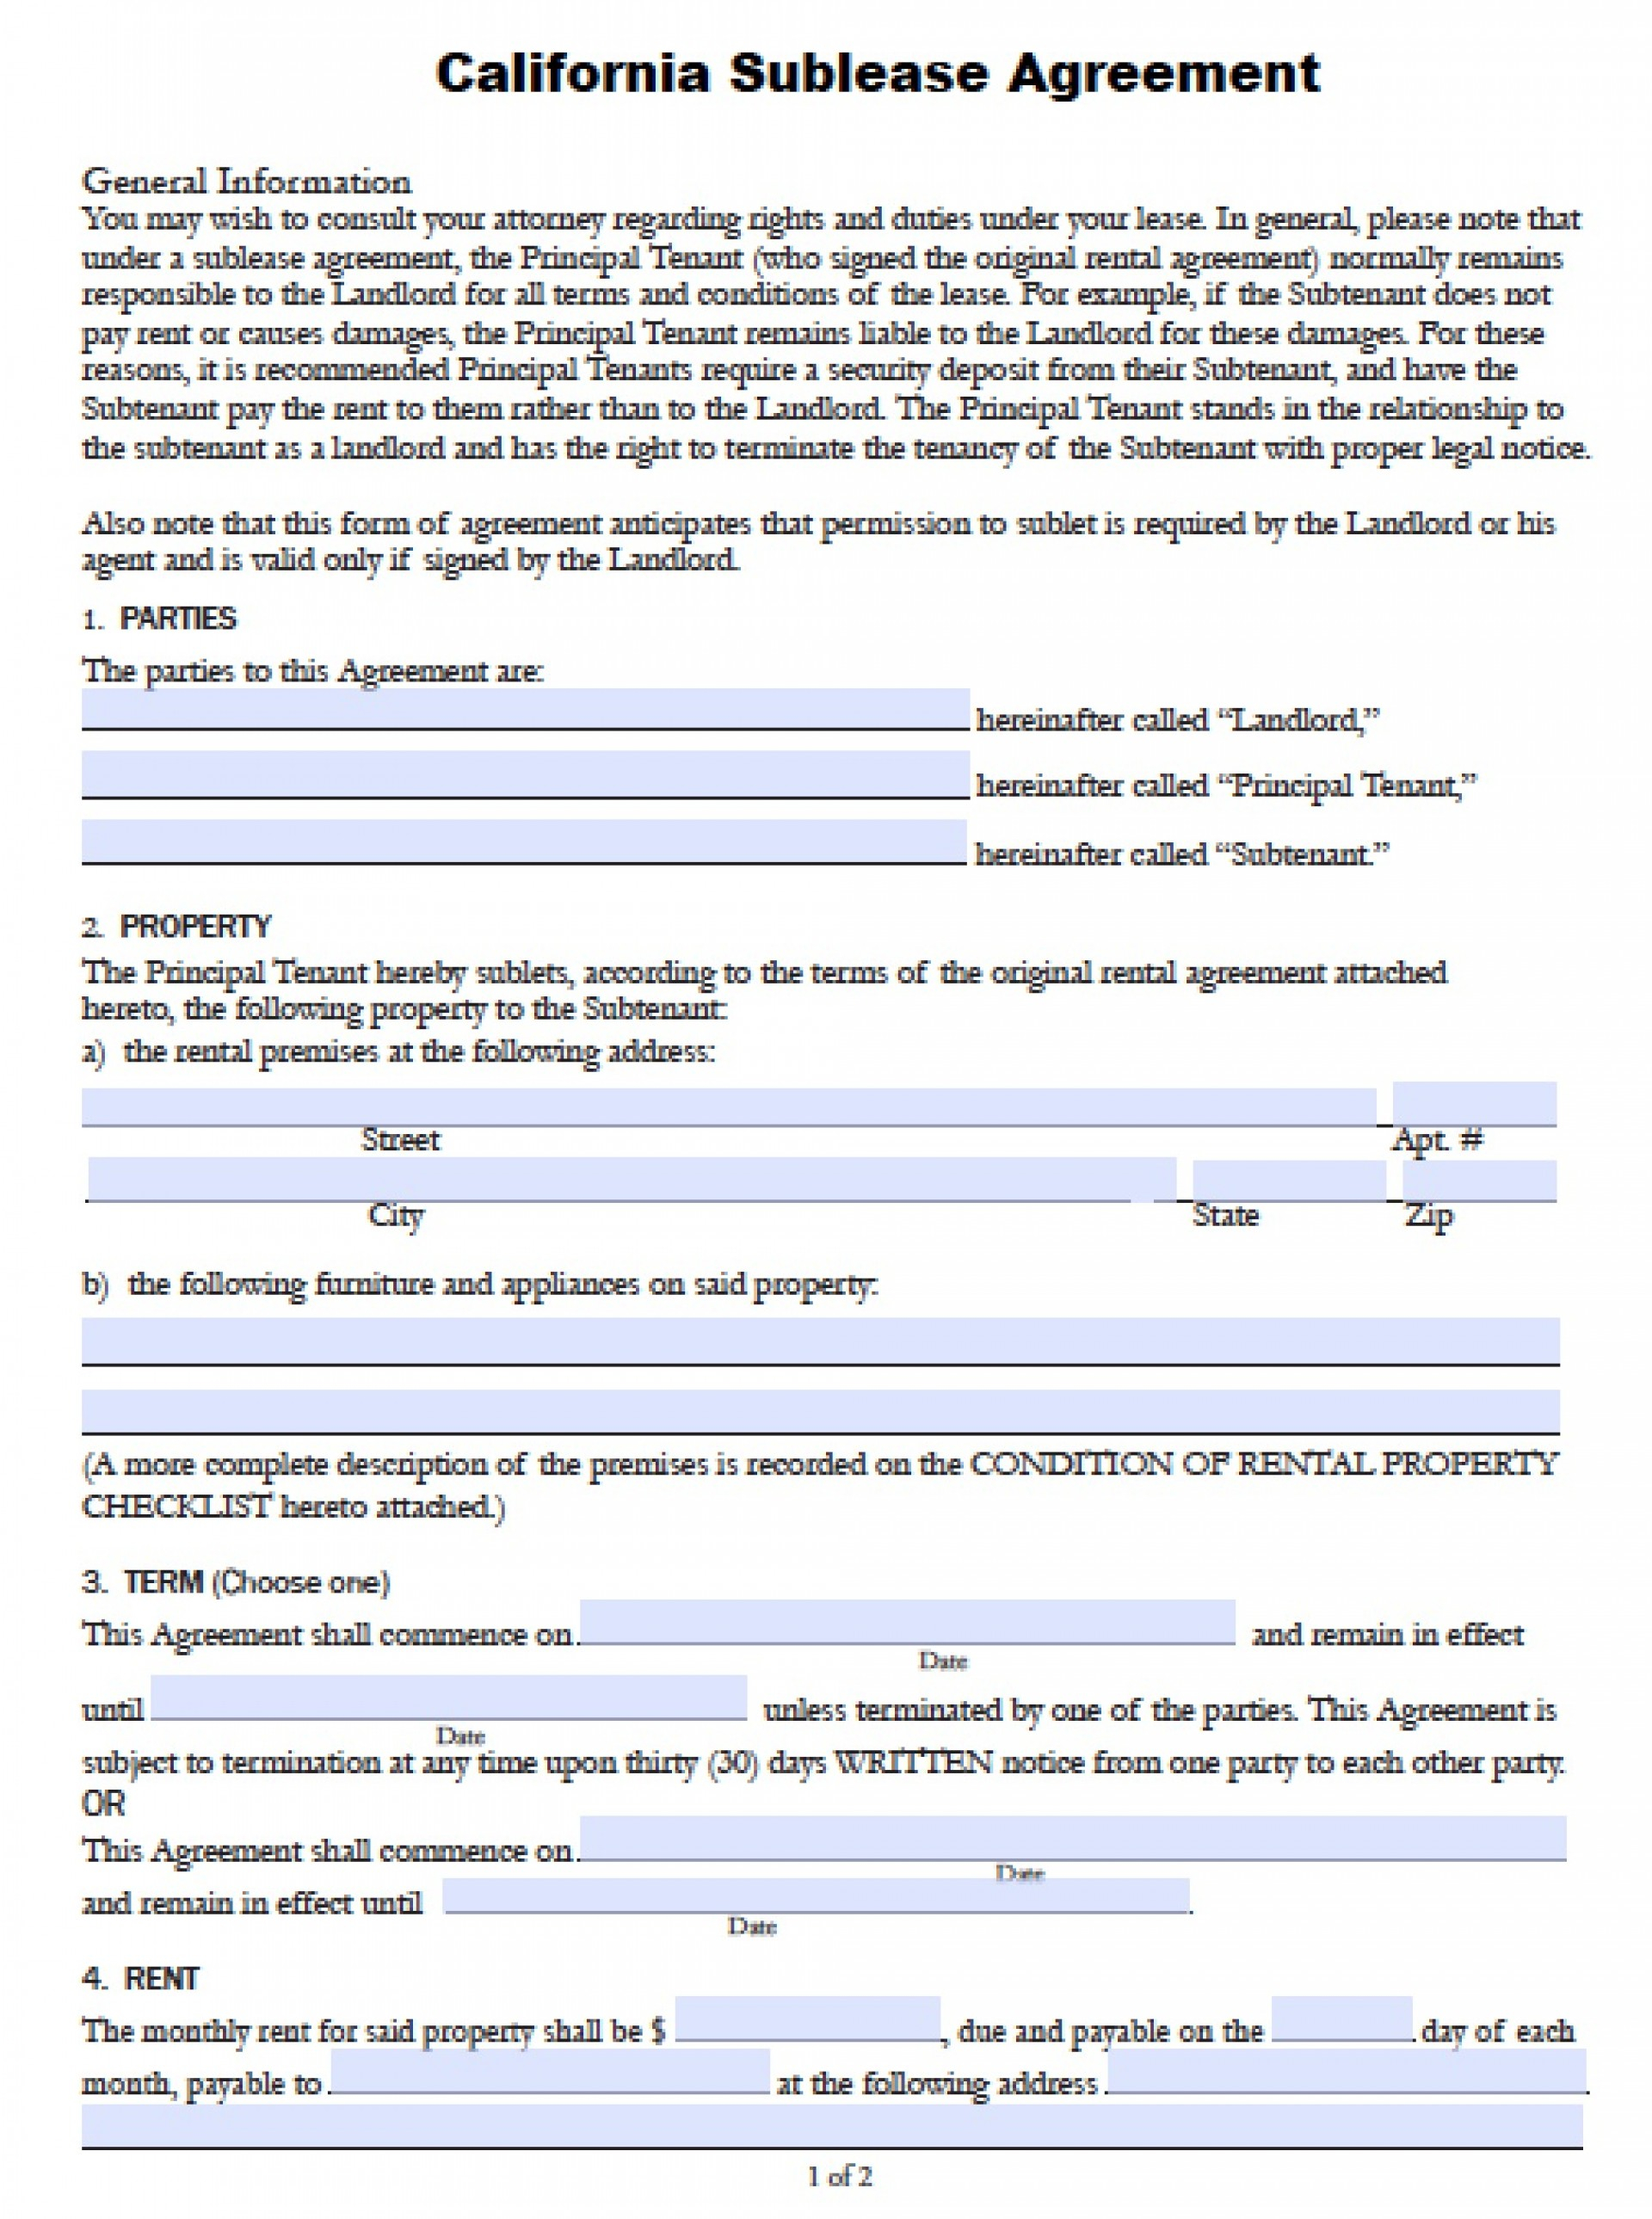 California Commercial Sublease Agreement 003 Template Ideas Commercial Sublease Agreement California Version